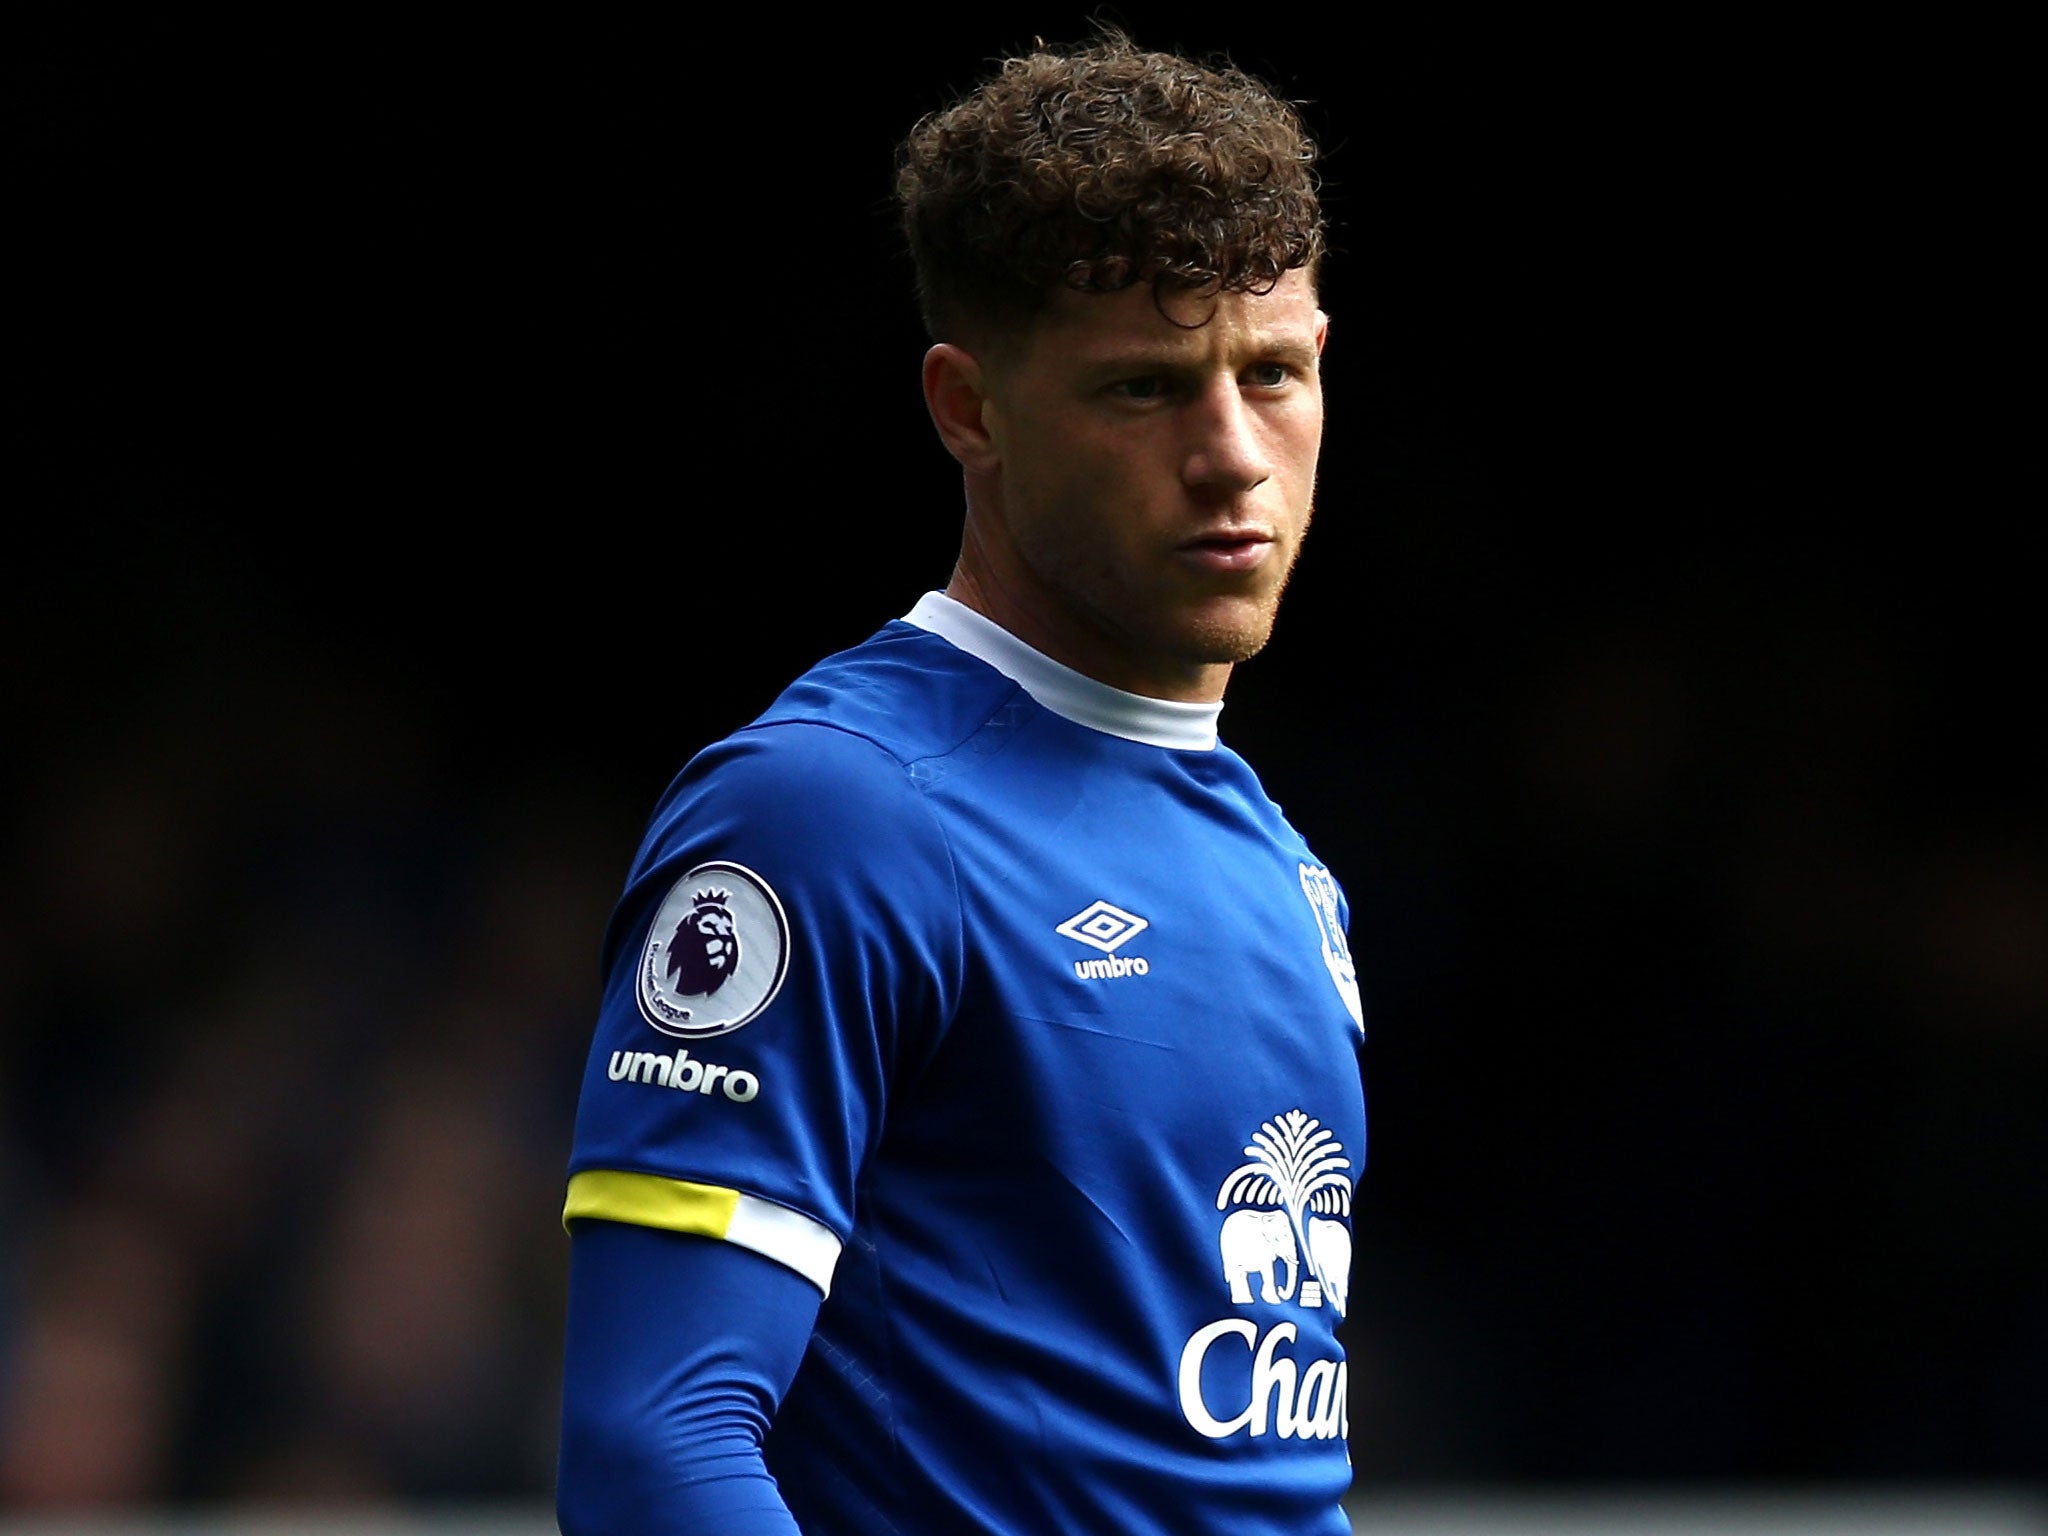 Barkley has one year left on his contract and rejected an extension offer